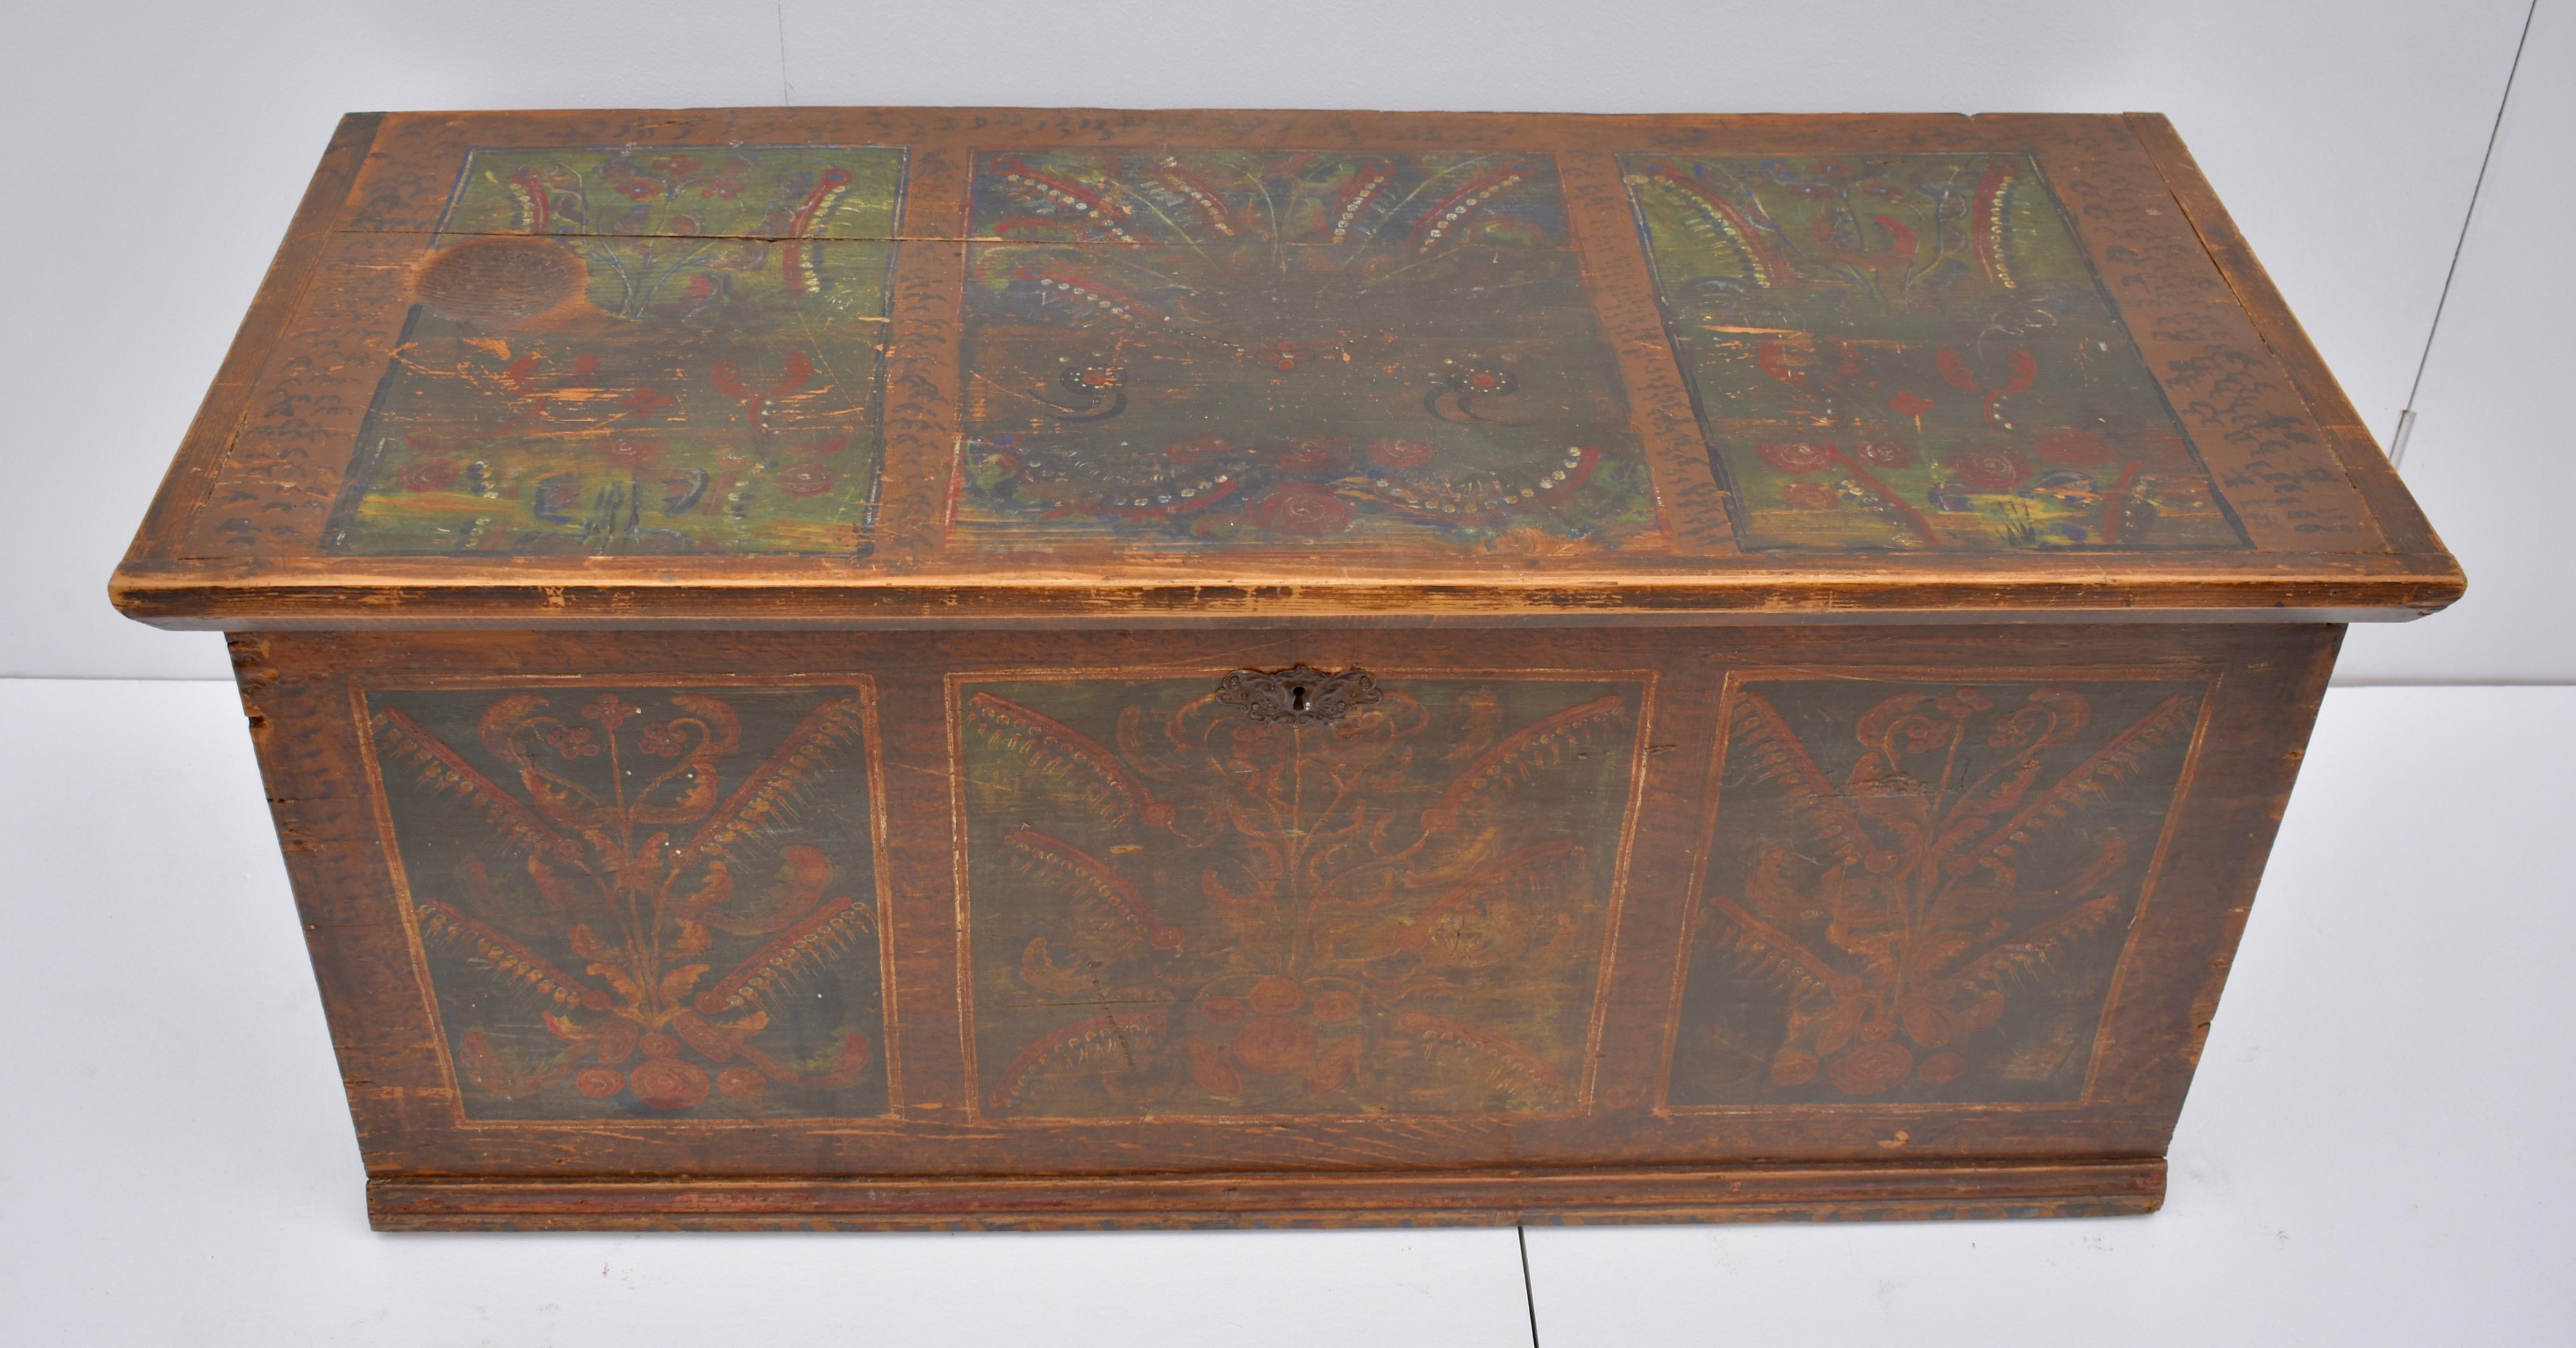 The background of this Primitive, nailed, hand painted trunk is a stylized grain paint. The sides have no further decoration. The front bears three painted panels enclosing multicolored bouquets of flowers and ferns on green, contrasting nicely with